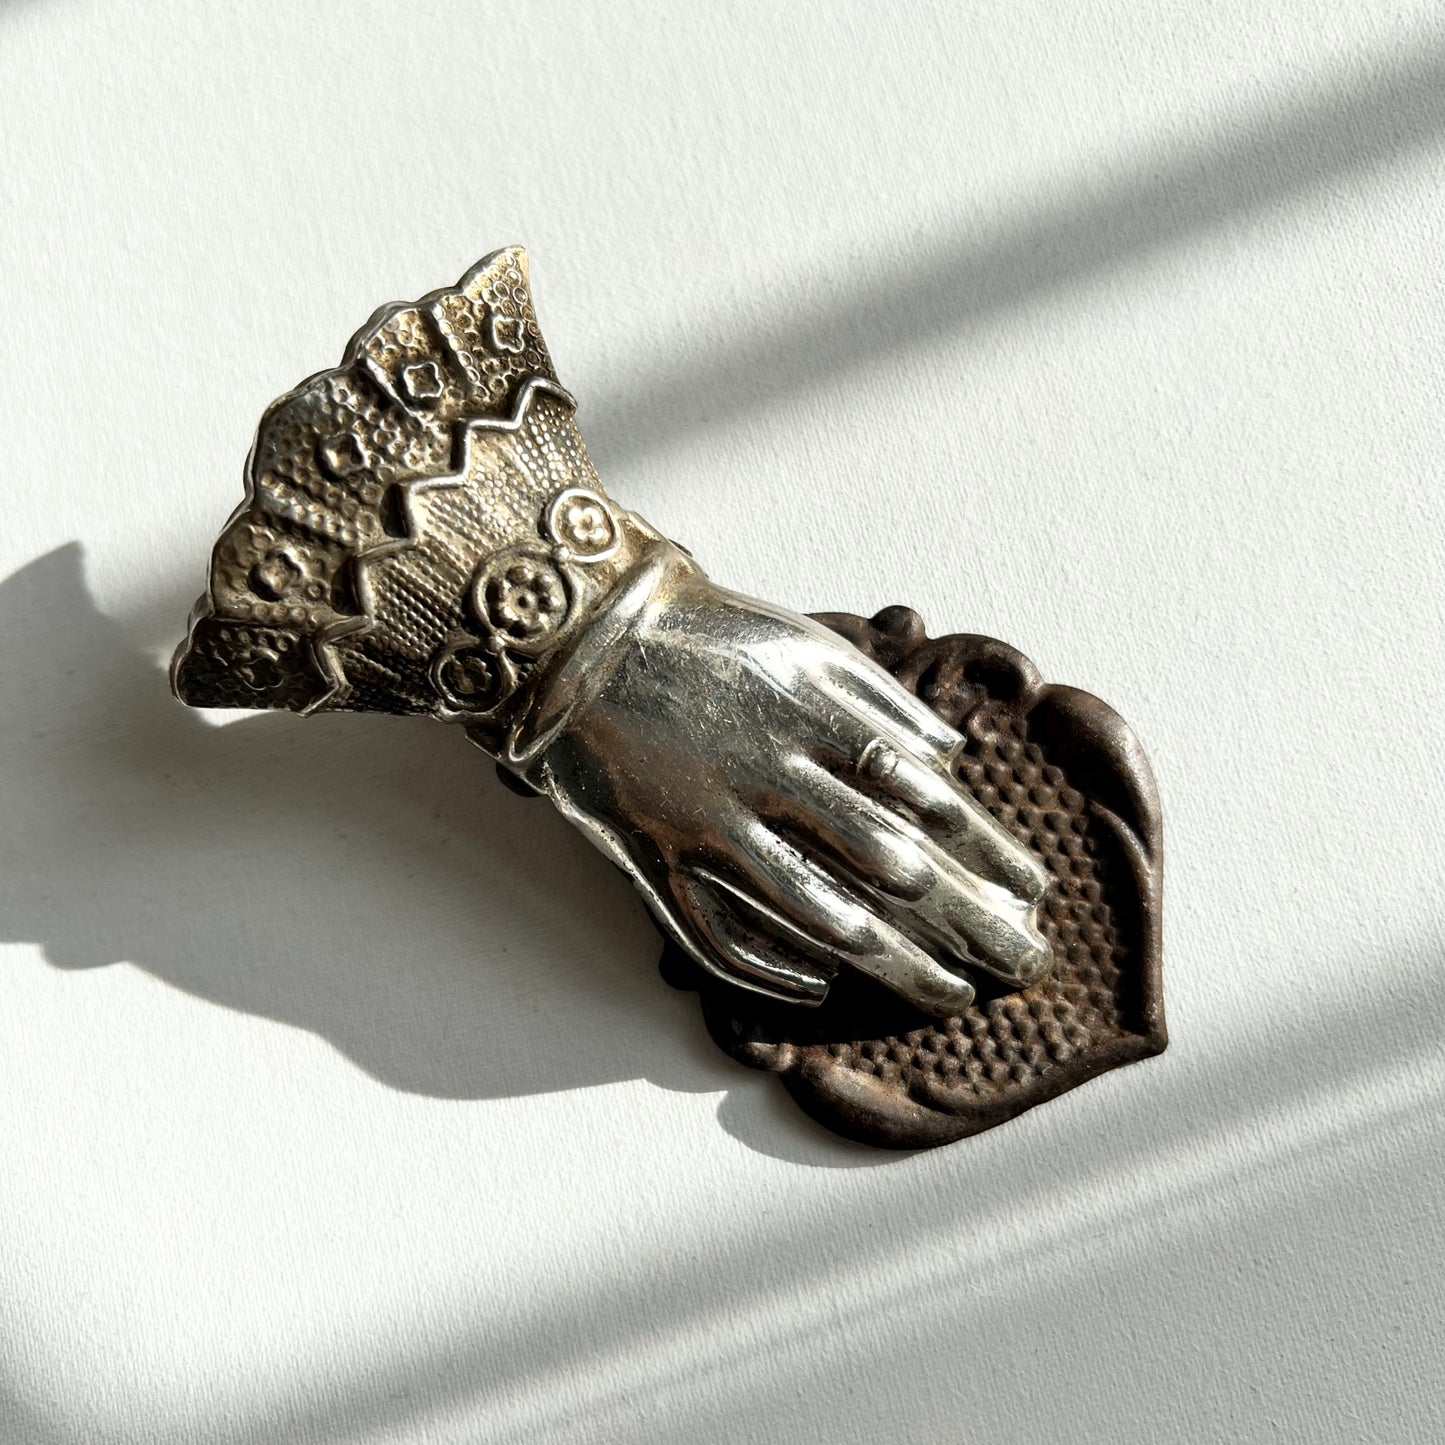 【Antique】UK - 1900s Victorian Style Hand Clip(Silver Tone)